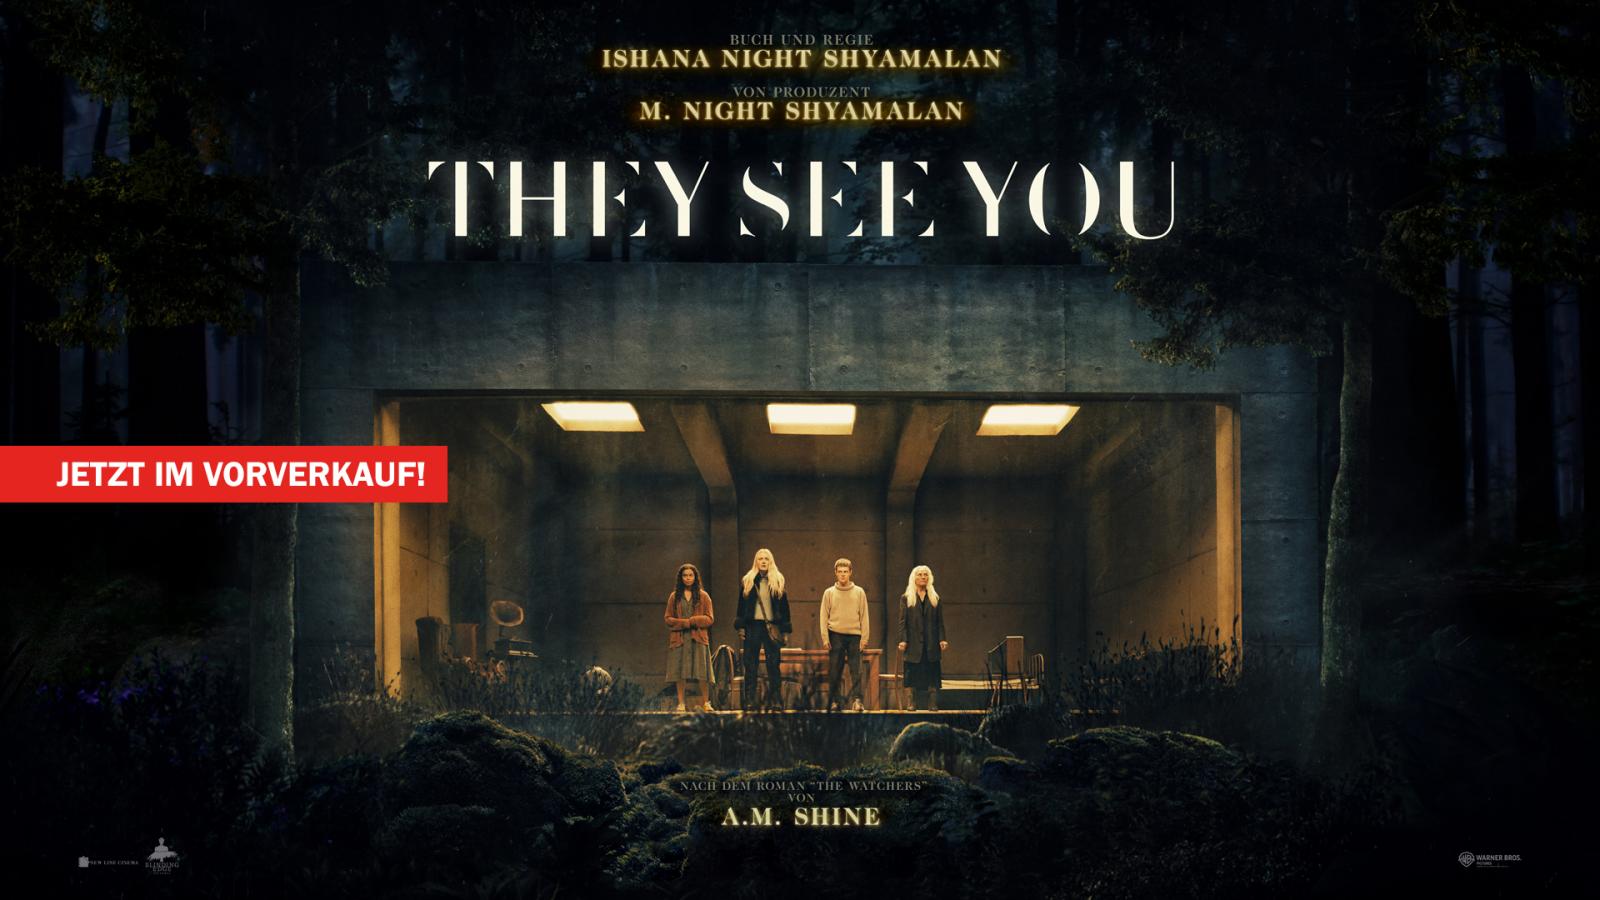 PREVIEW: THEY SEE YOU